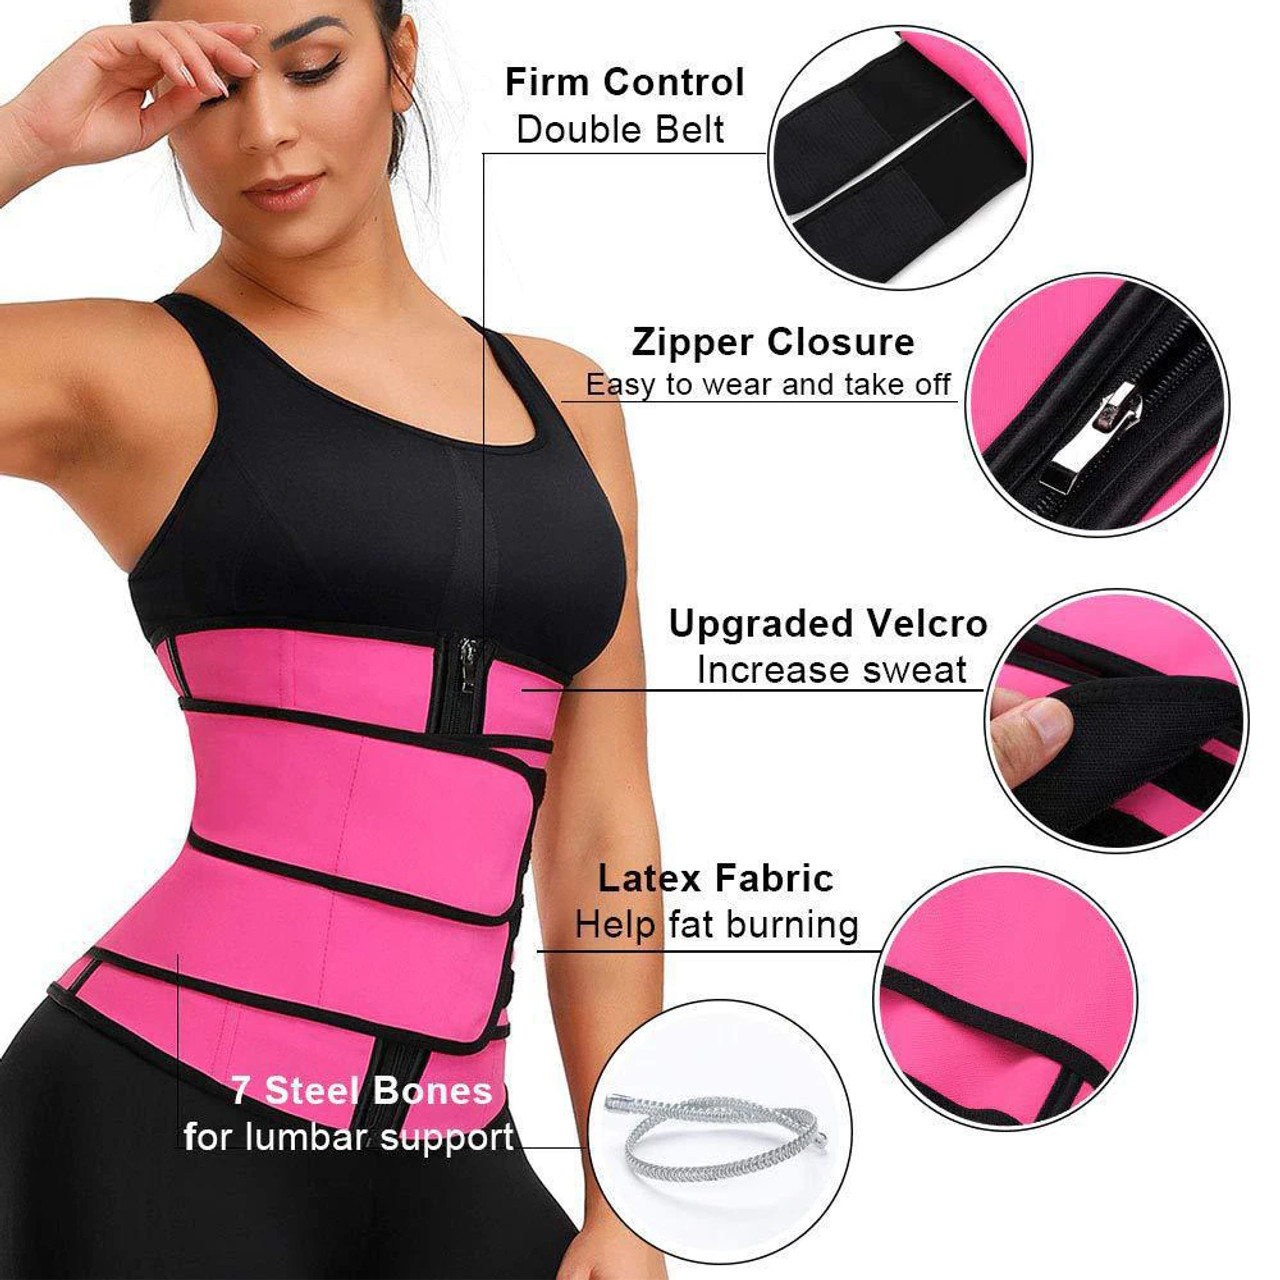 Achieve Your Dream Figure with Shape Good Gang Waist Training Corsets